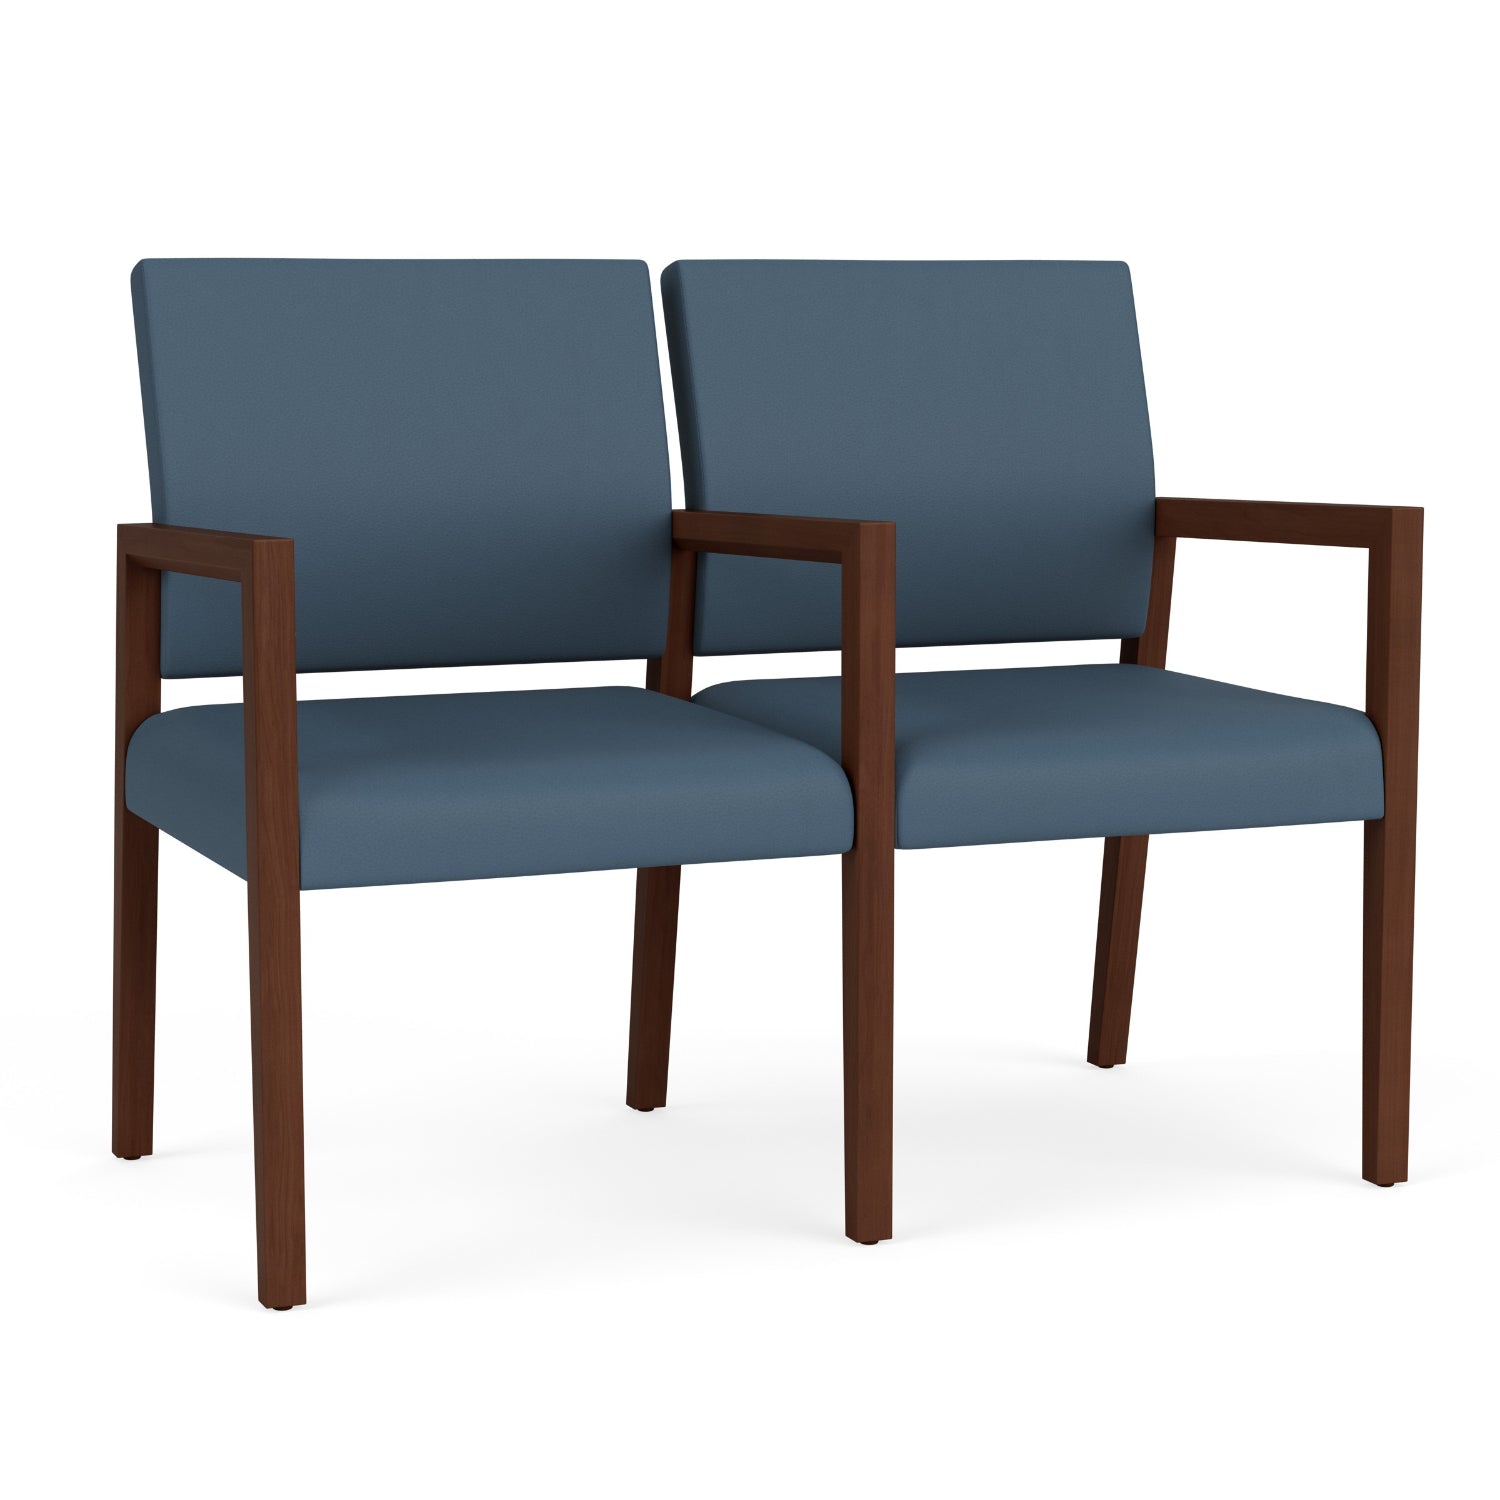 Brooklyn Collection Reception Seating, 2 Seats with Center Arm, Standard Vinyl Upholstery, FREE SHIPPING